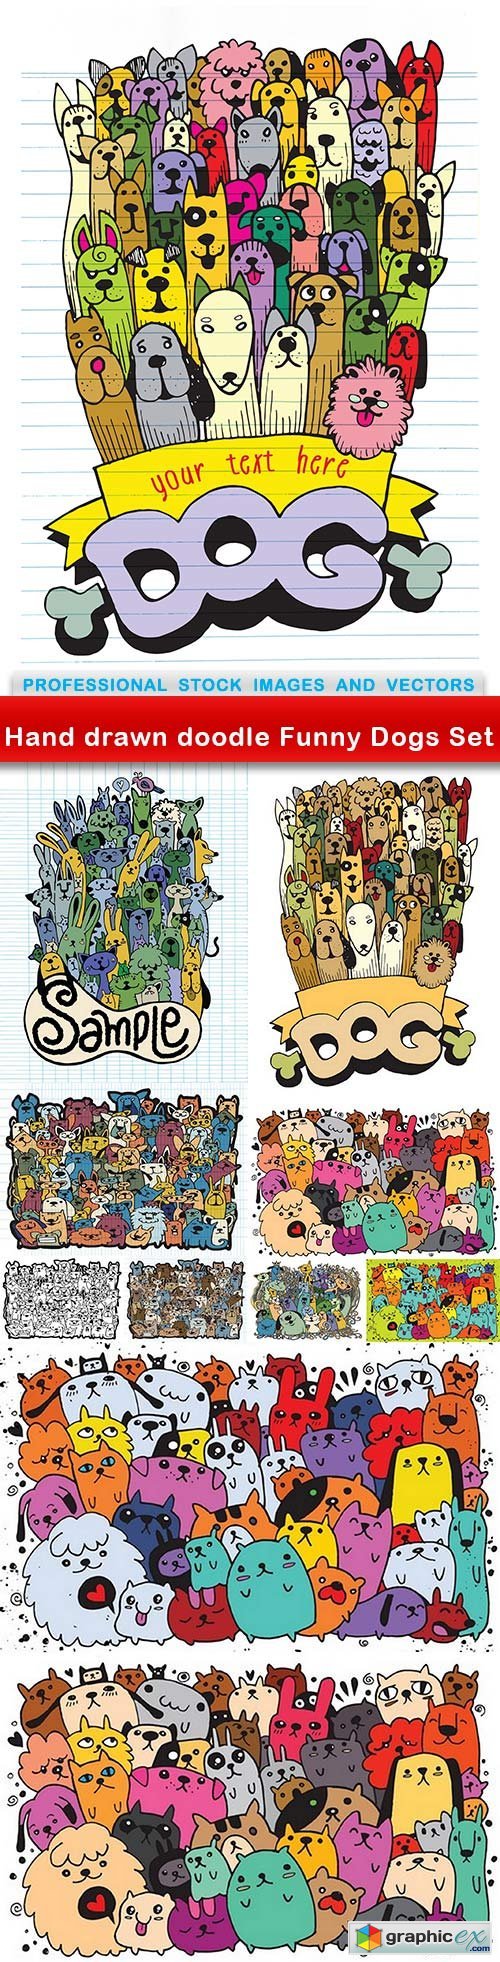 Hand drawn doodle Funny Dogs Set - 11 EPS